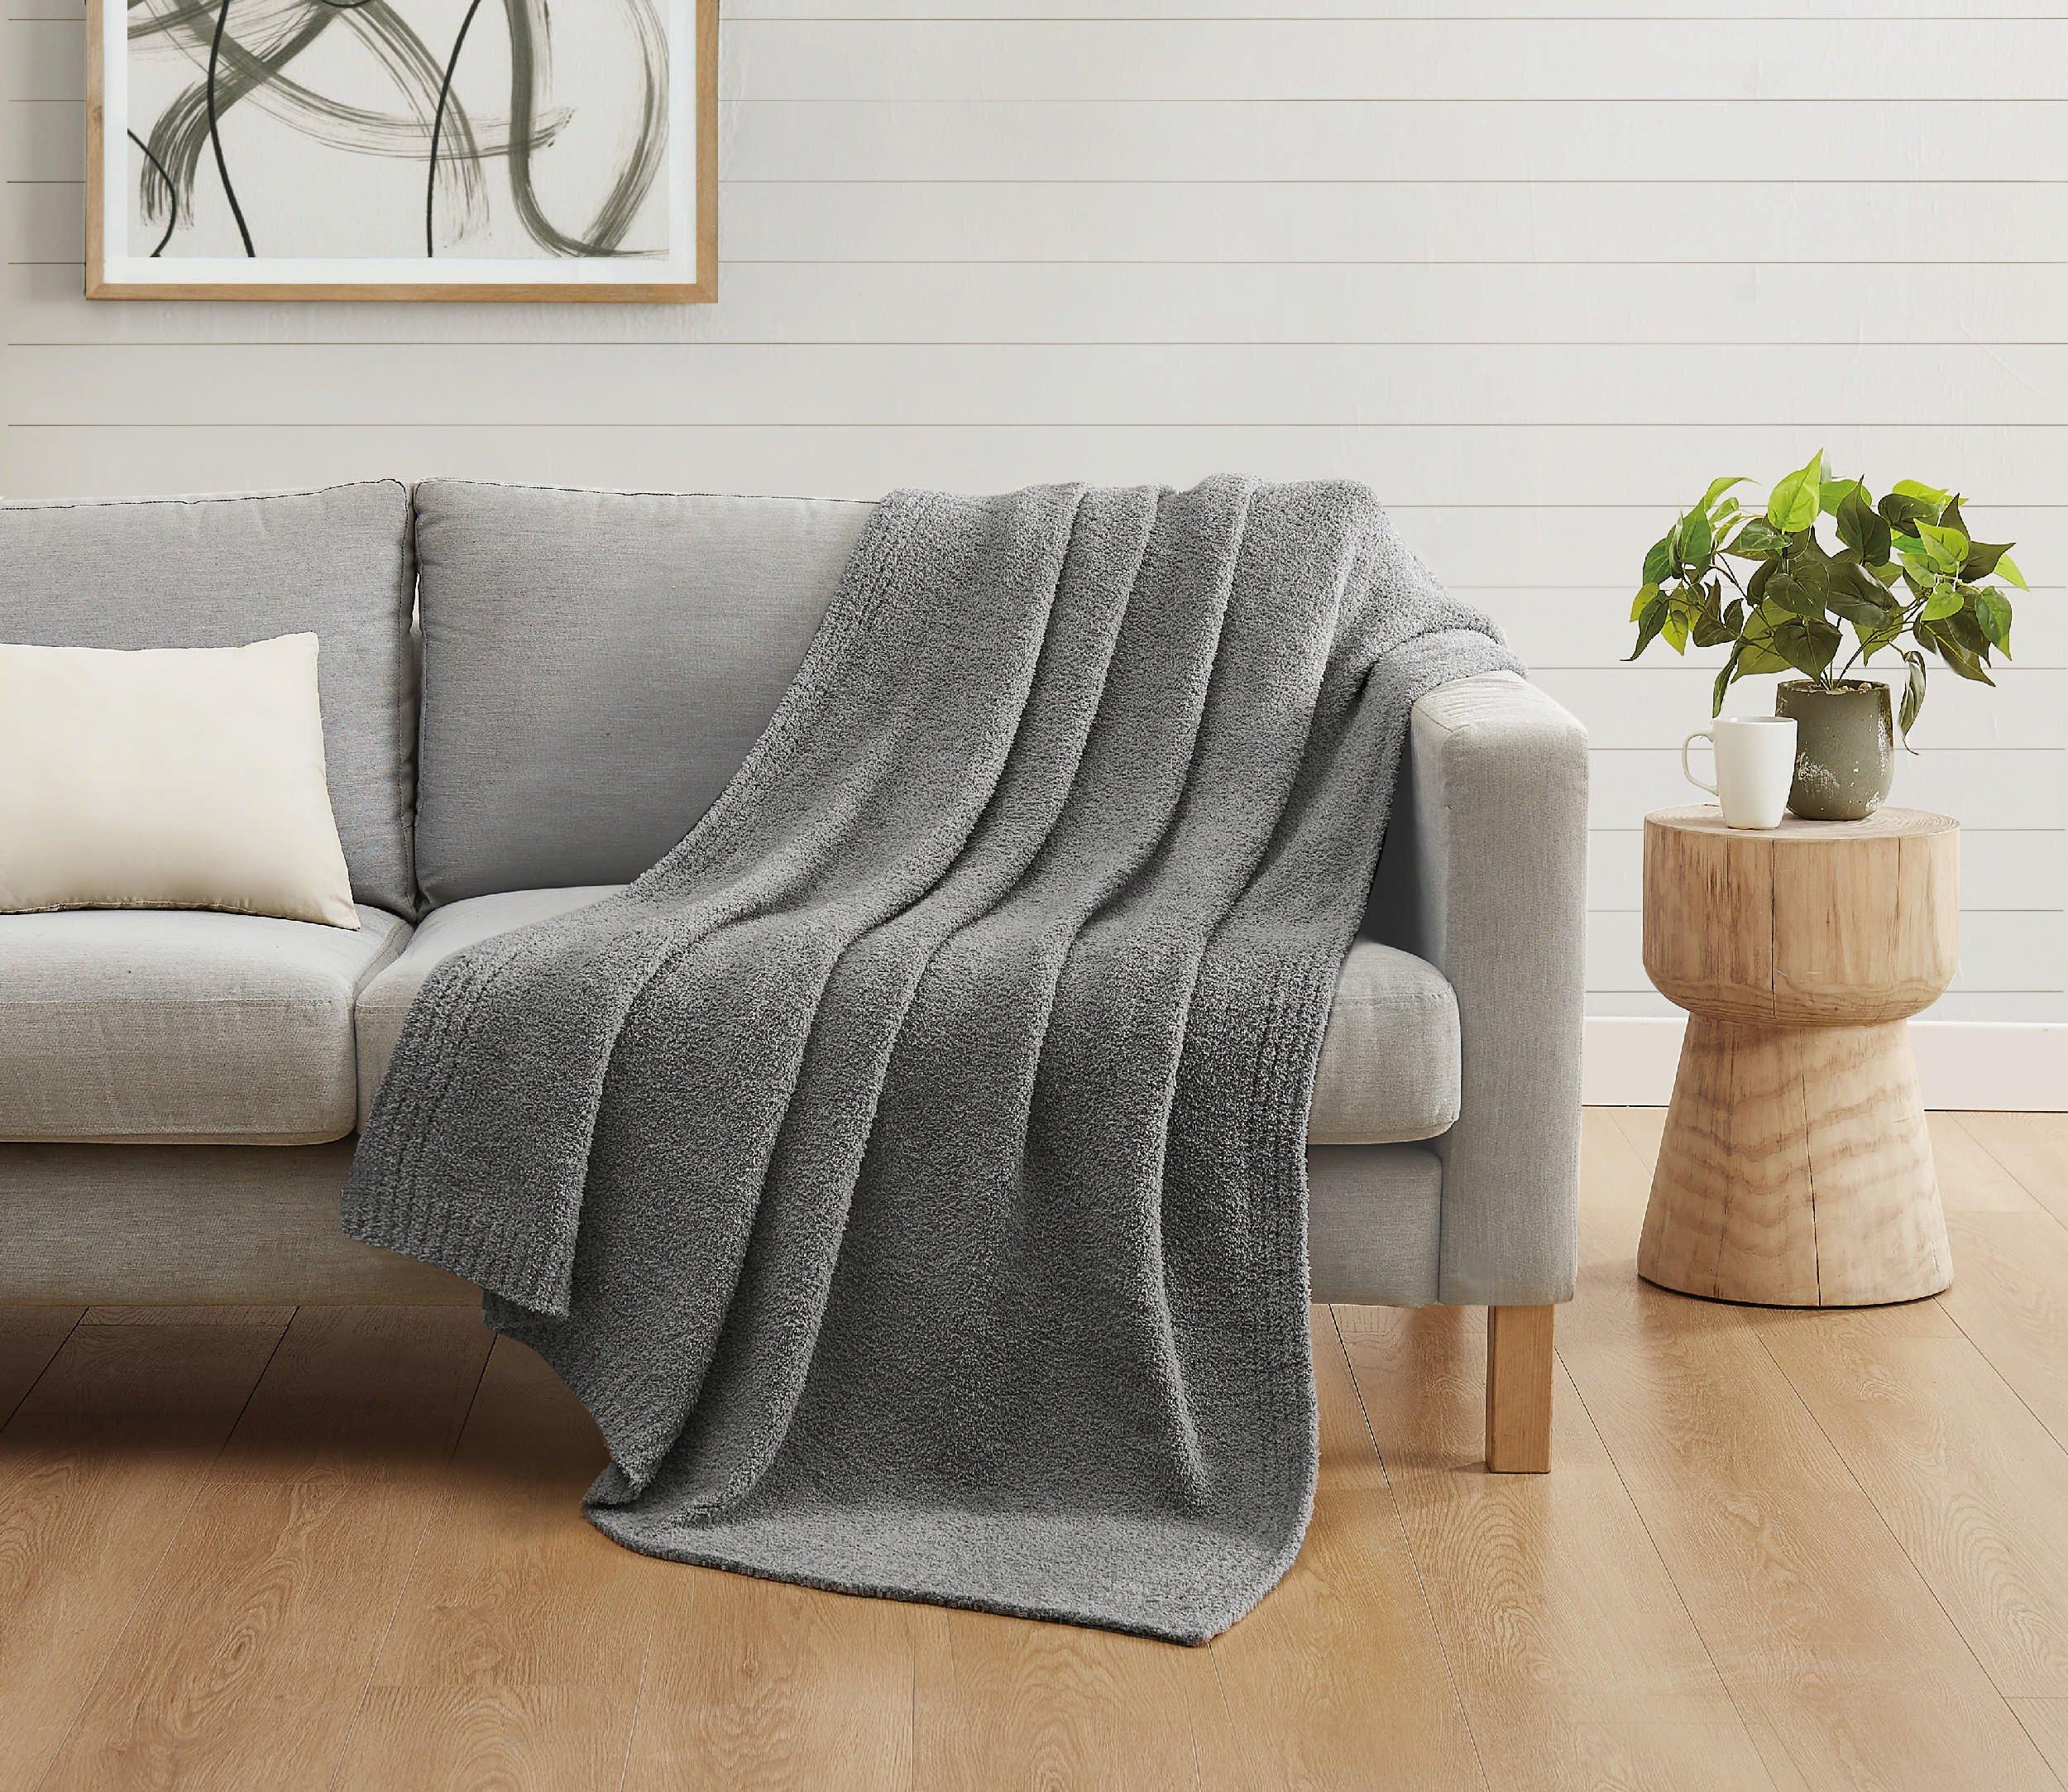 Photos - Other interior and decor Truly Soft Cozy Knit Throw Blanket